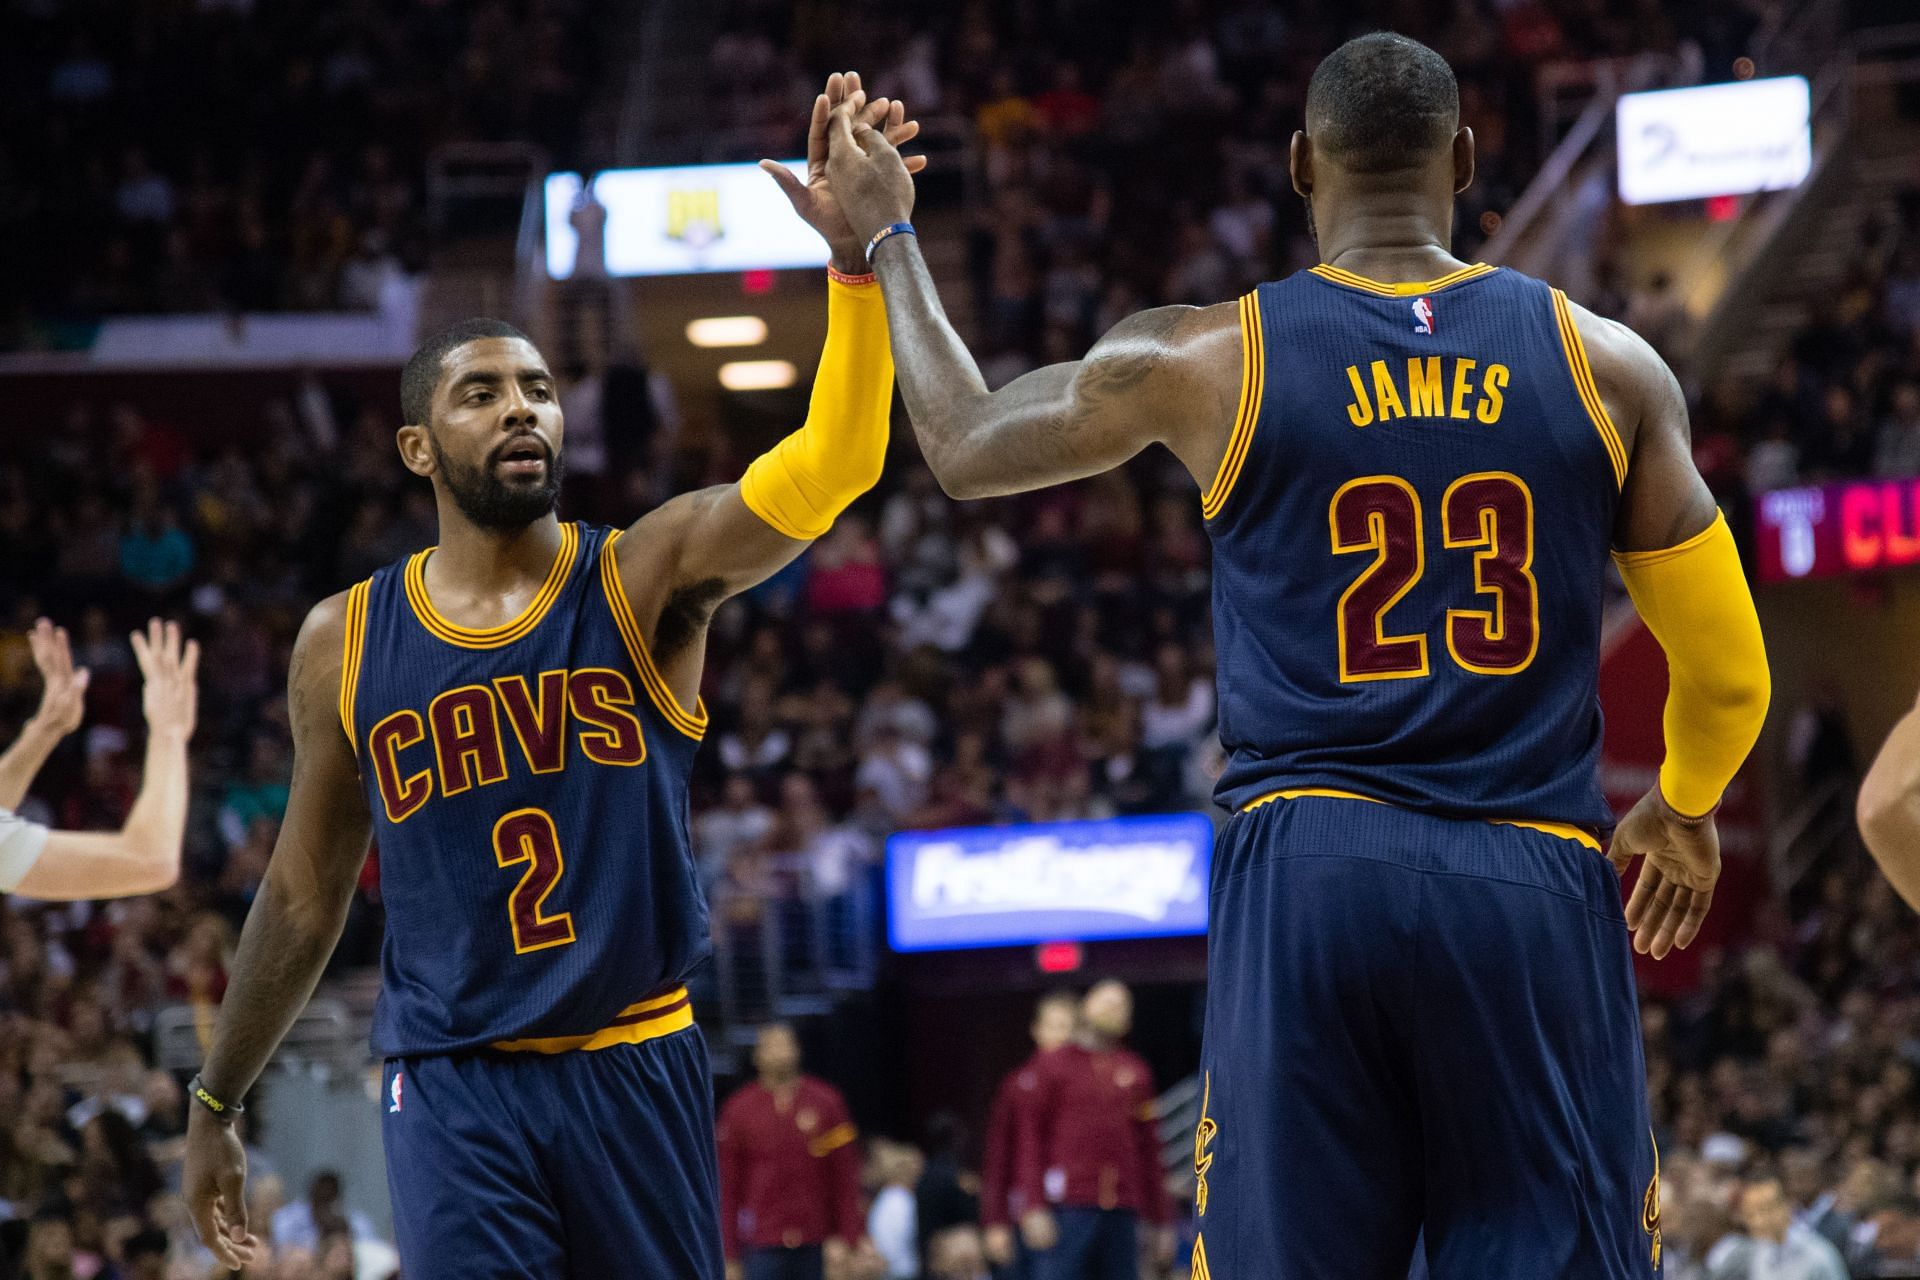 Kyrie Irving and LeBron James during their time with the Cleveland Cavaliers.